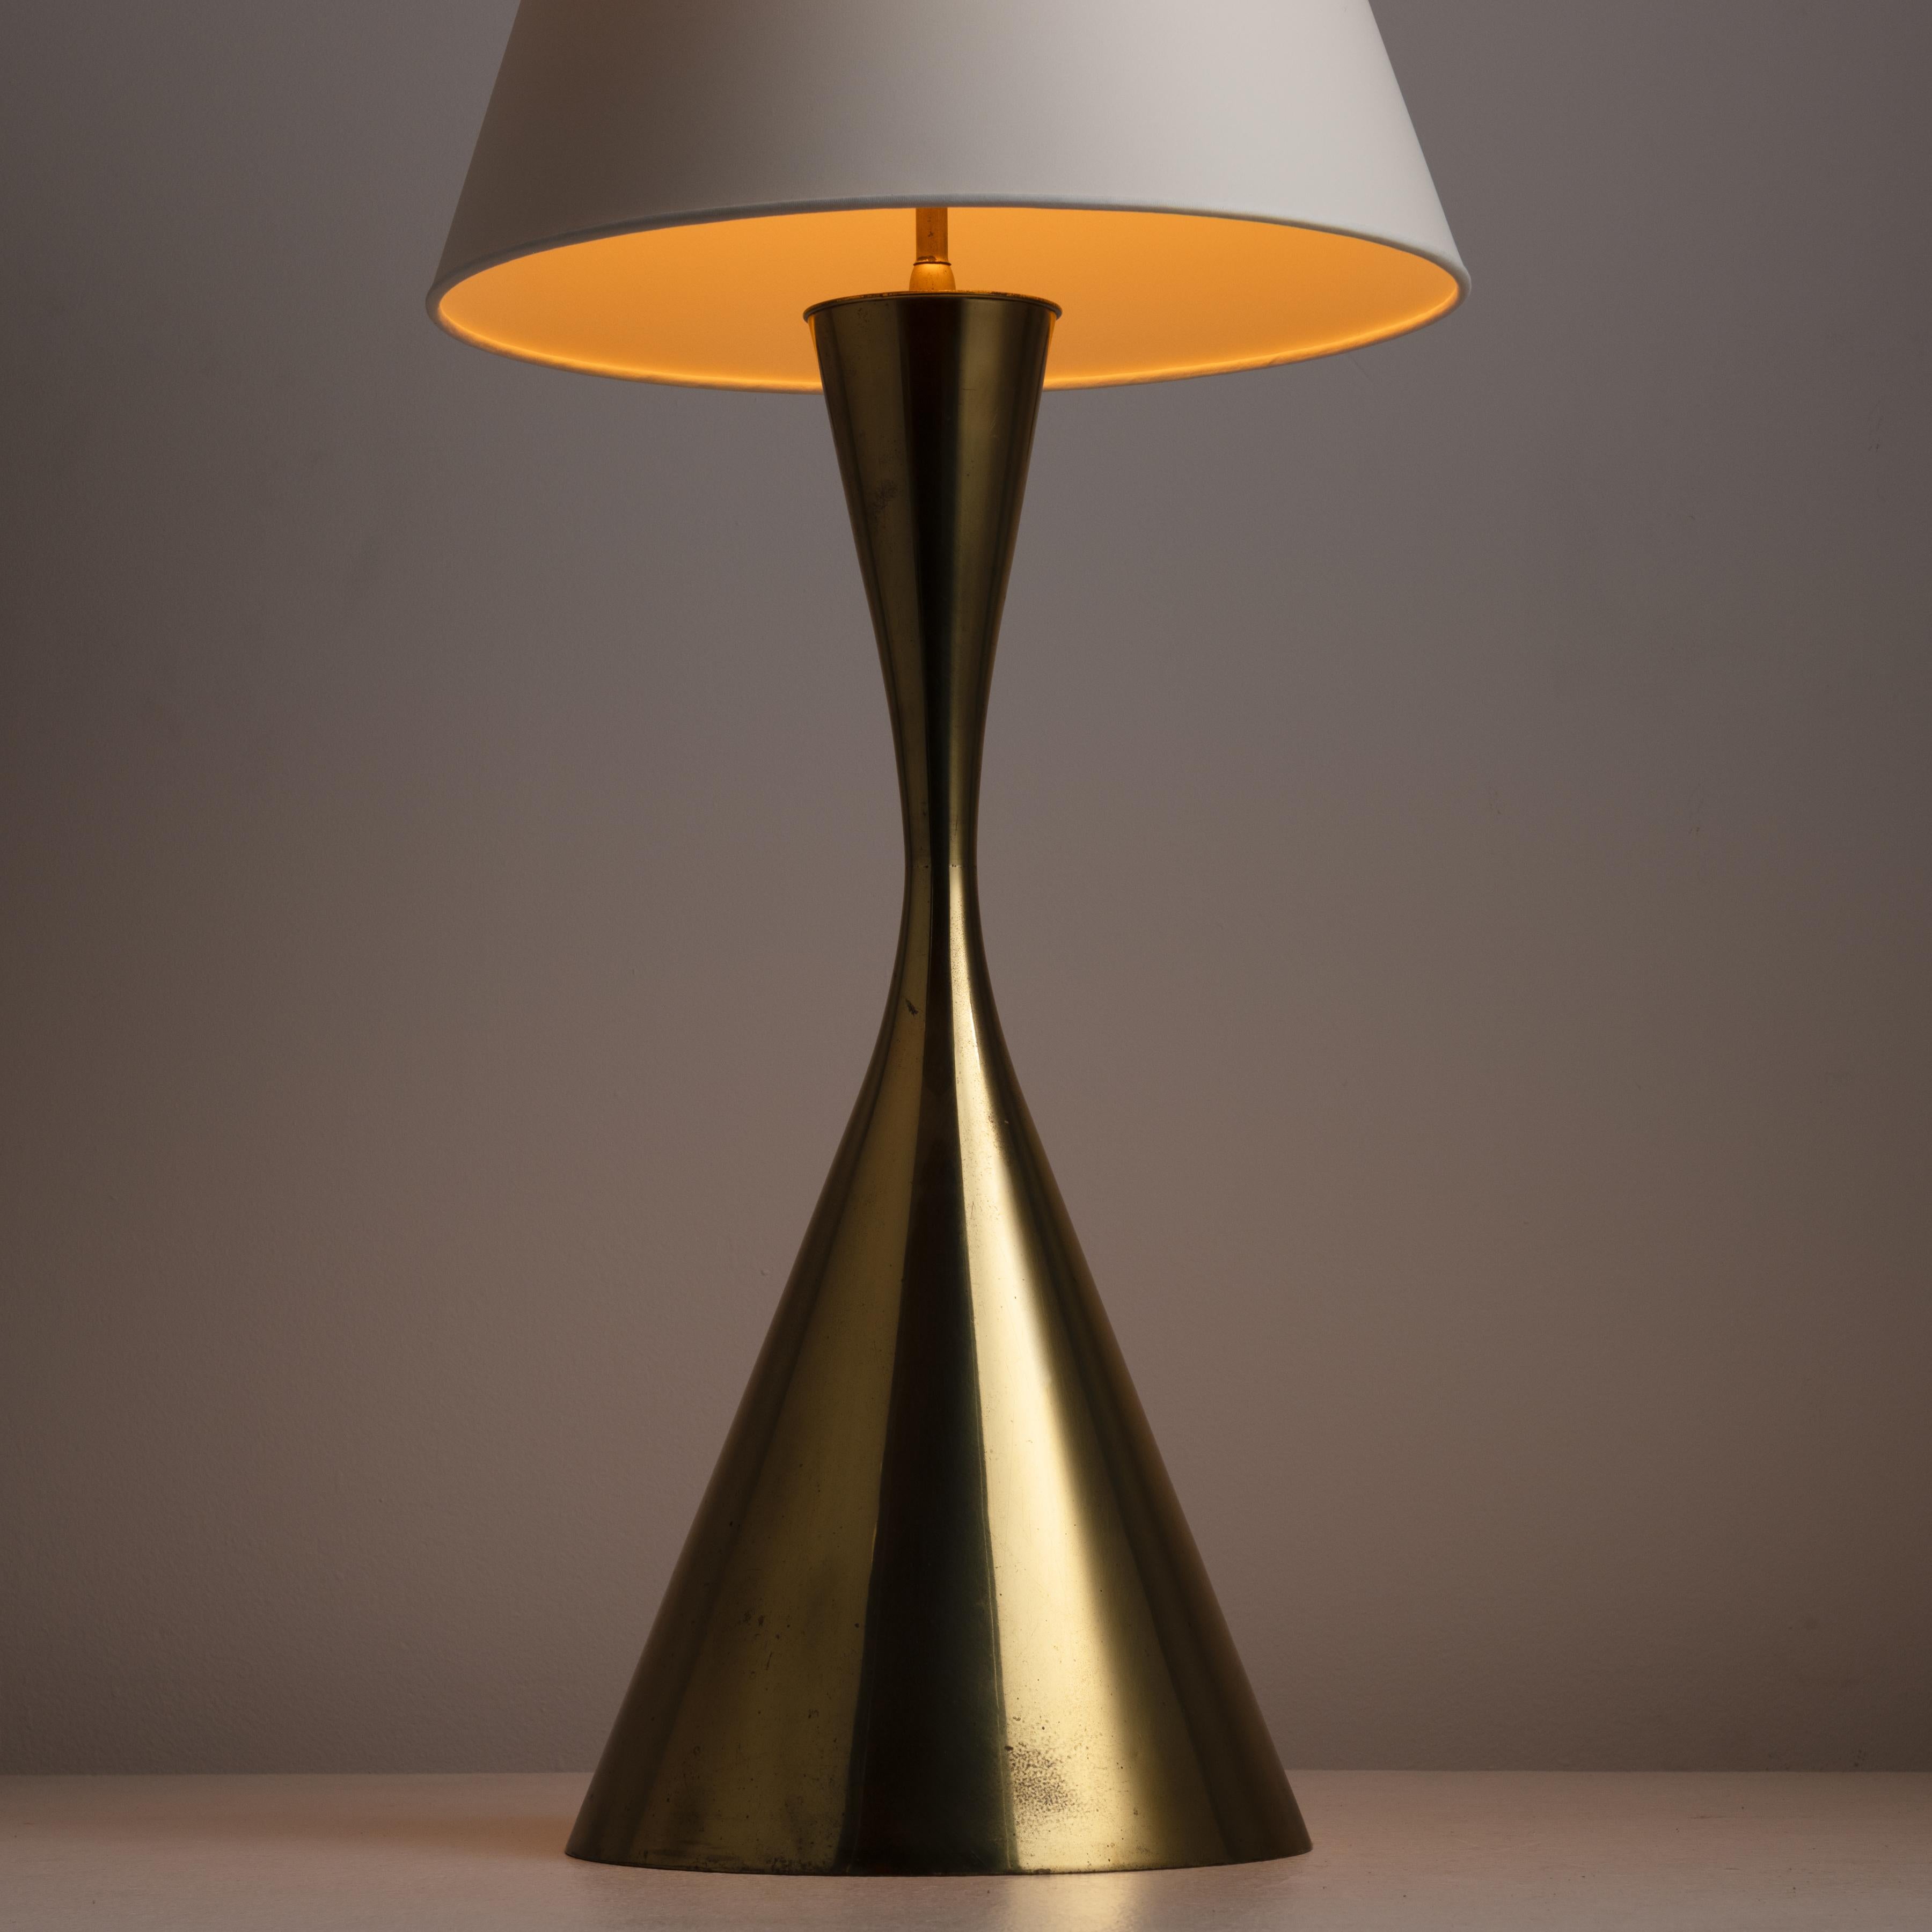 XL Table Lamp by Angelo Lelii for Arredoluce Monza. Designed and manufactured in Italy, circa 1960. Large statement table lamp with polished conical brass base. The shape of the lamp base is complimented by a white linen shade of a similar